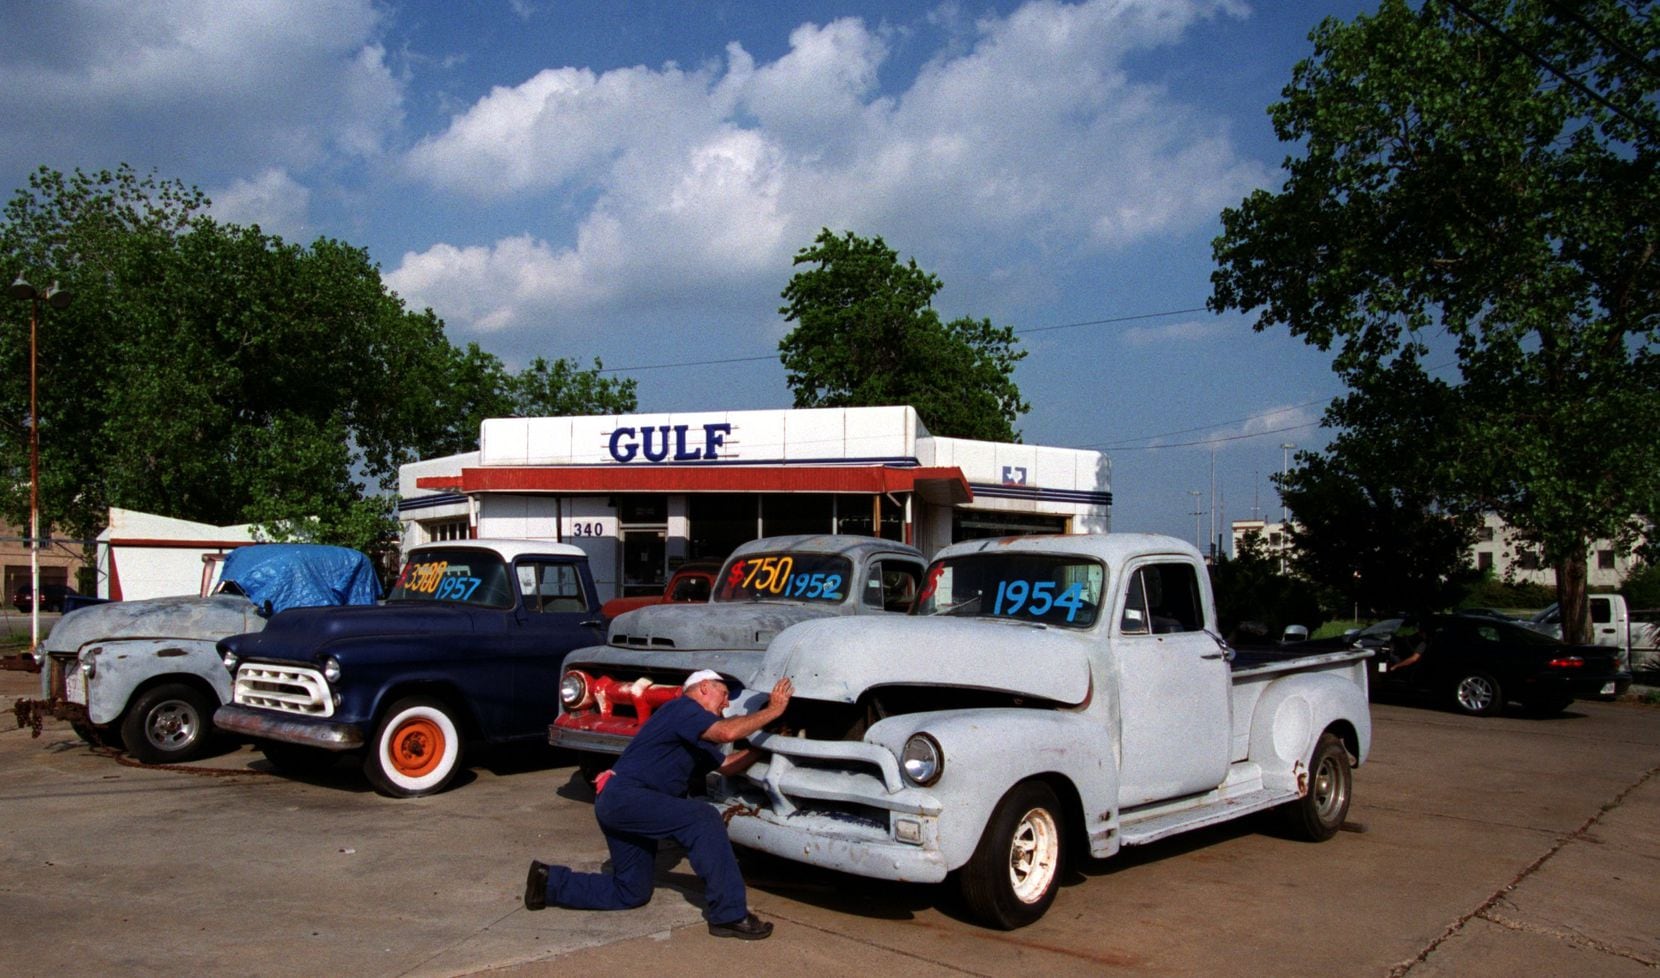 Riegel Gulf Service in Deep Ellum, which closed in 2002, will become a bar called...